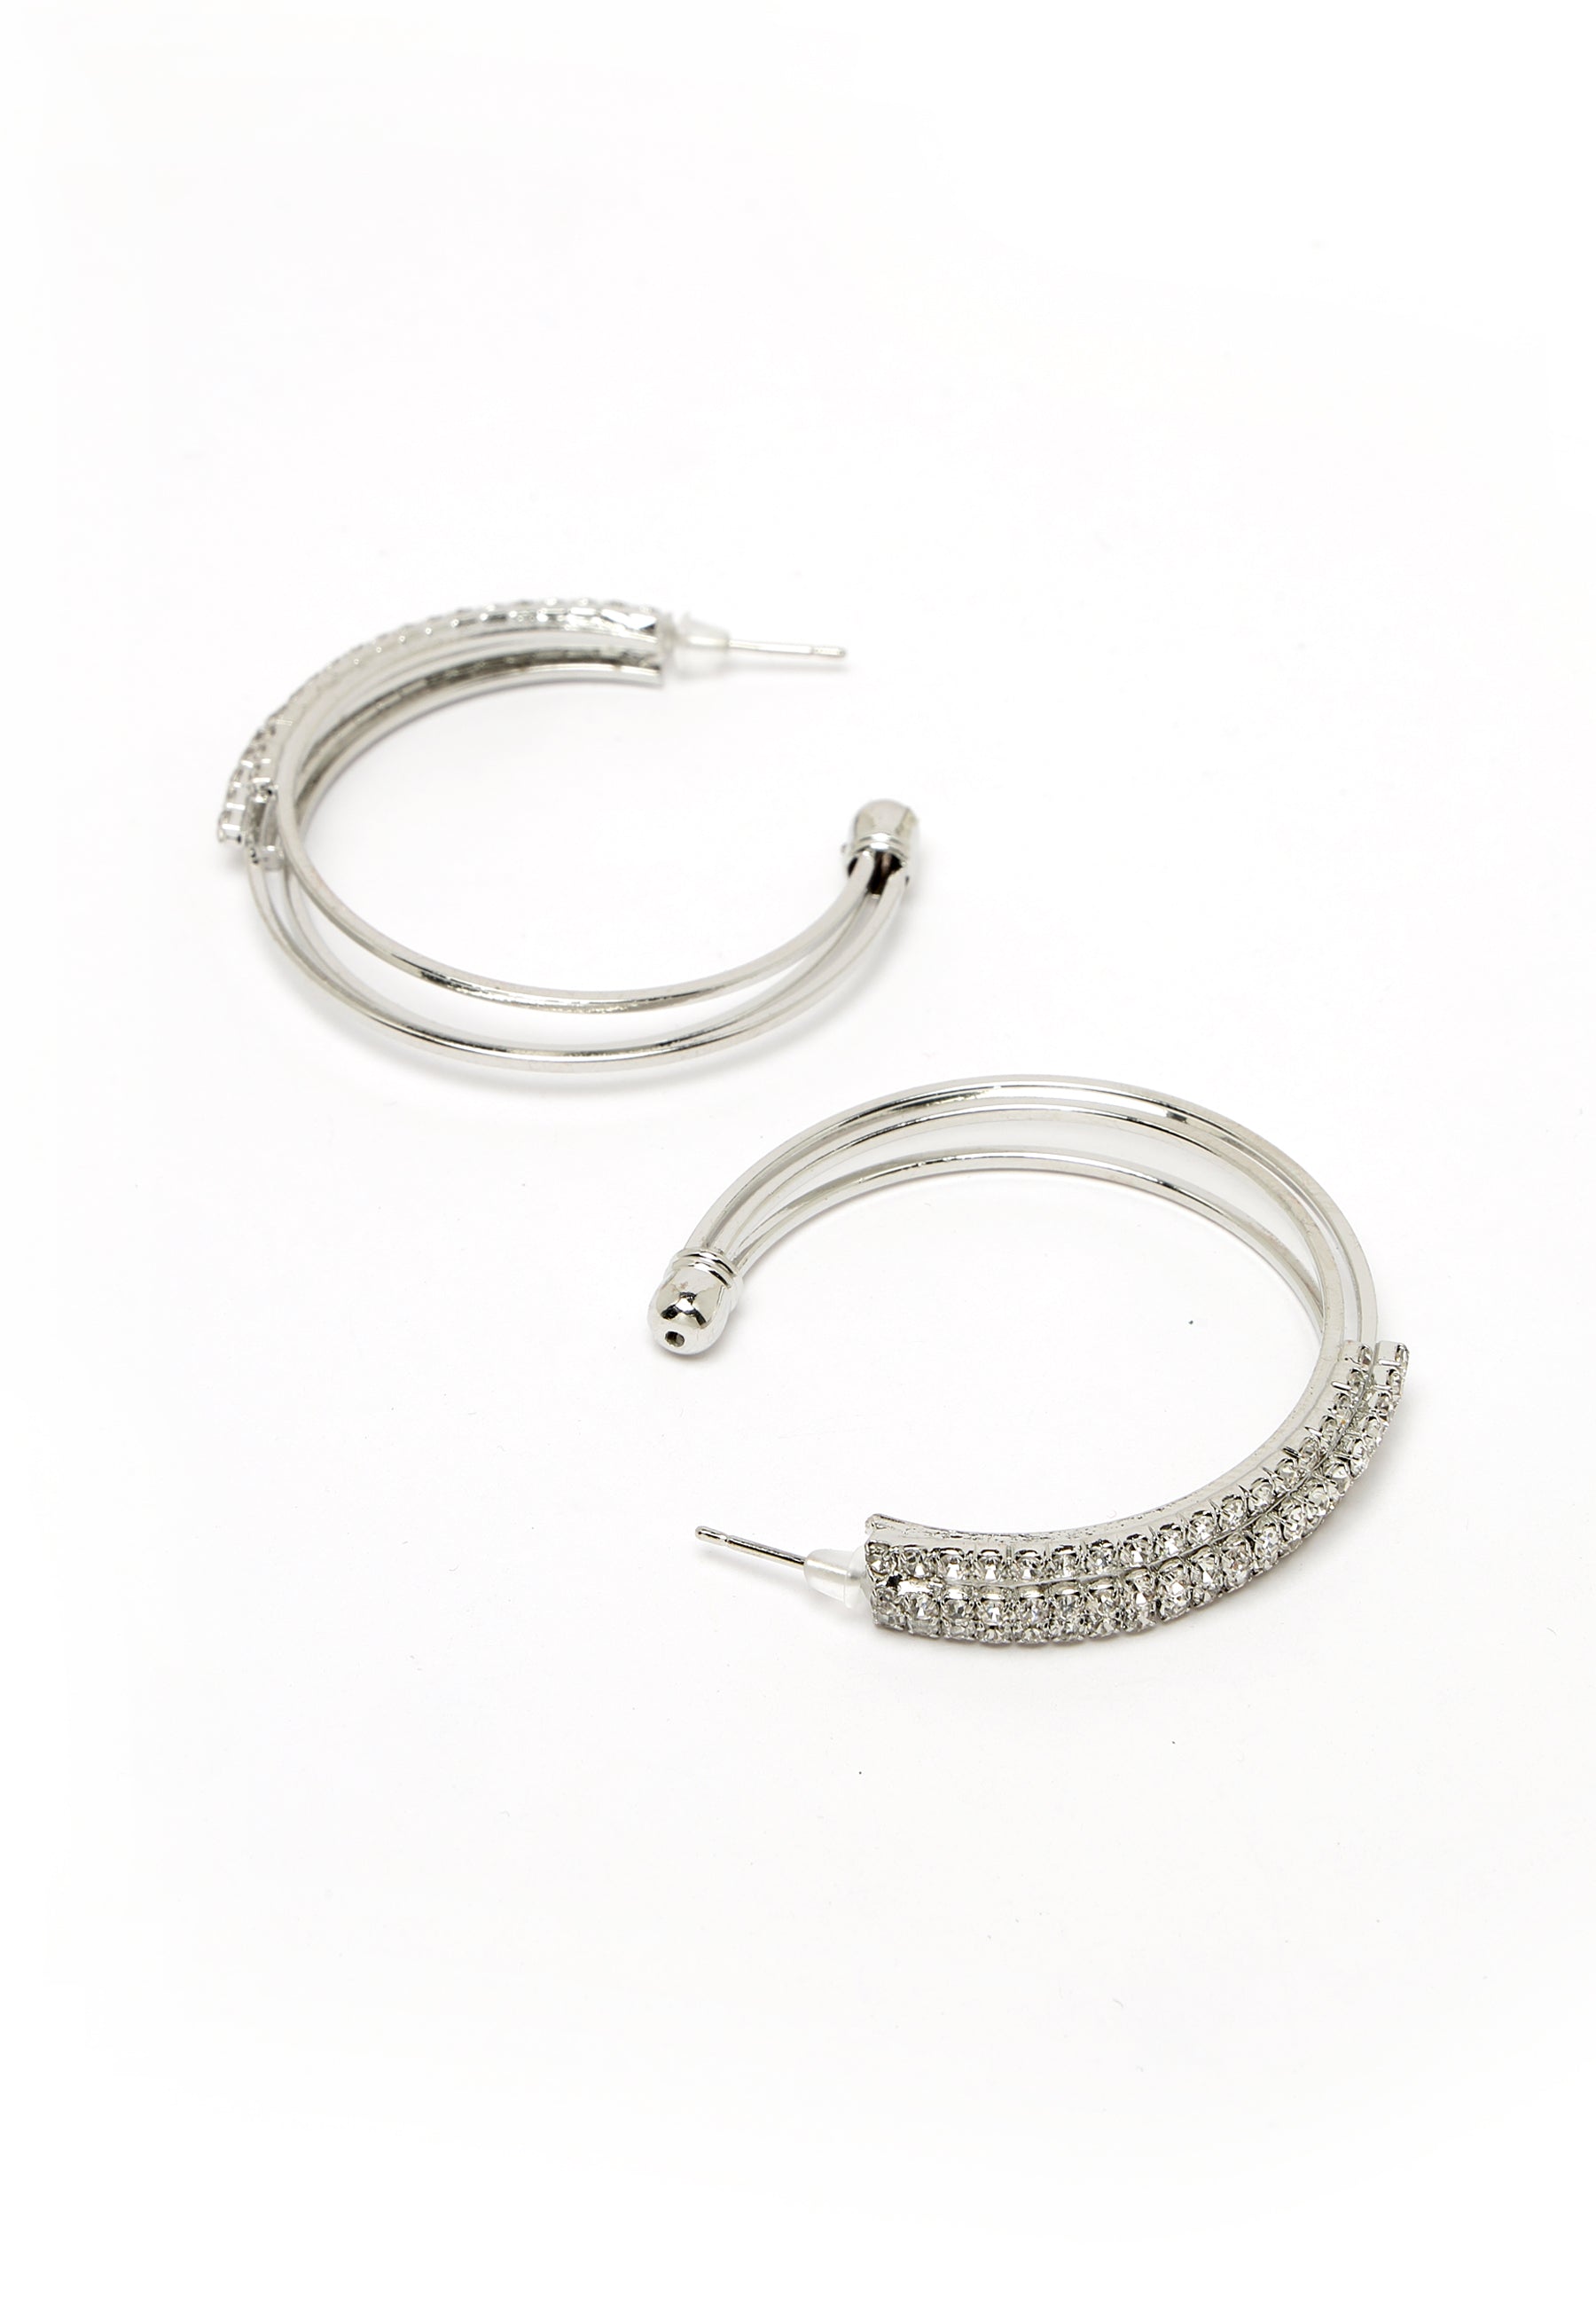 C Shape Silver-Colored Crystal Earrings